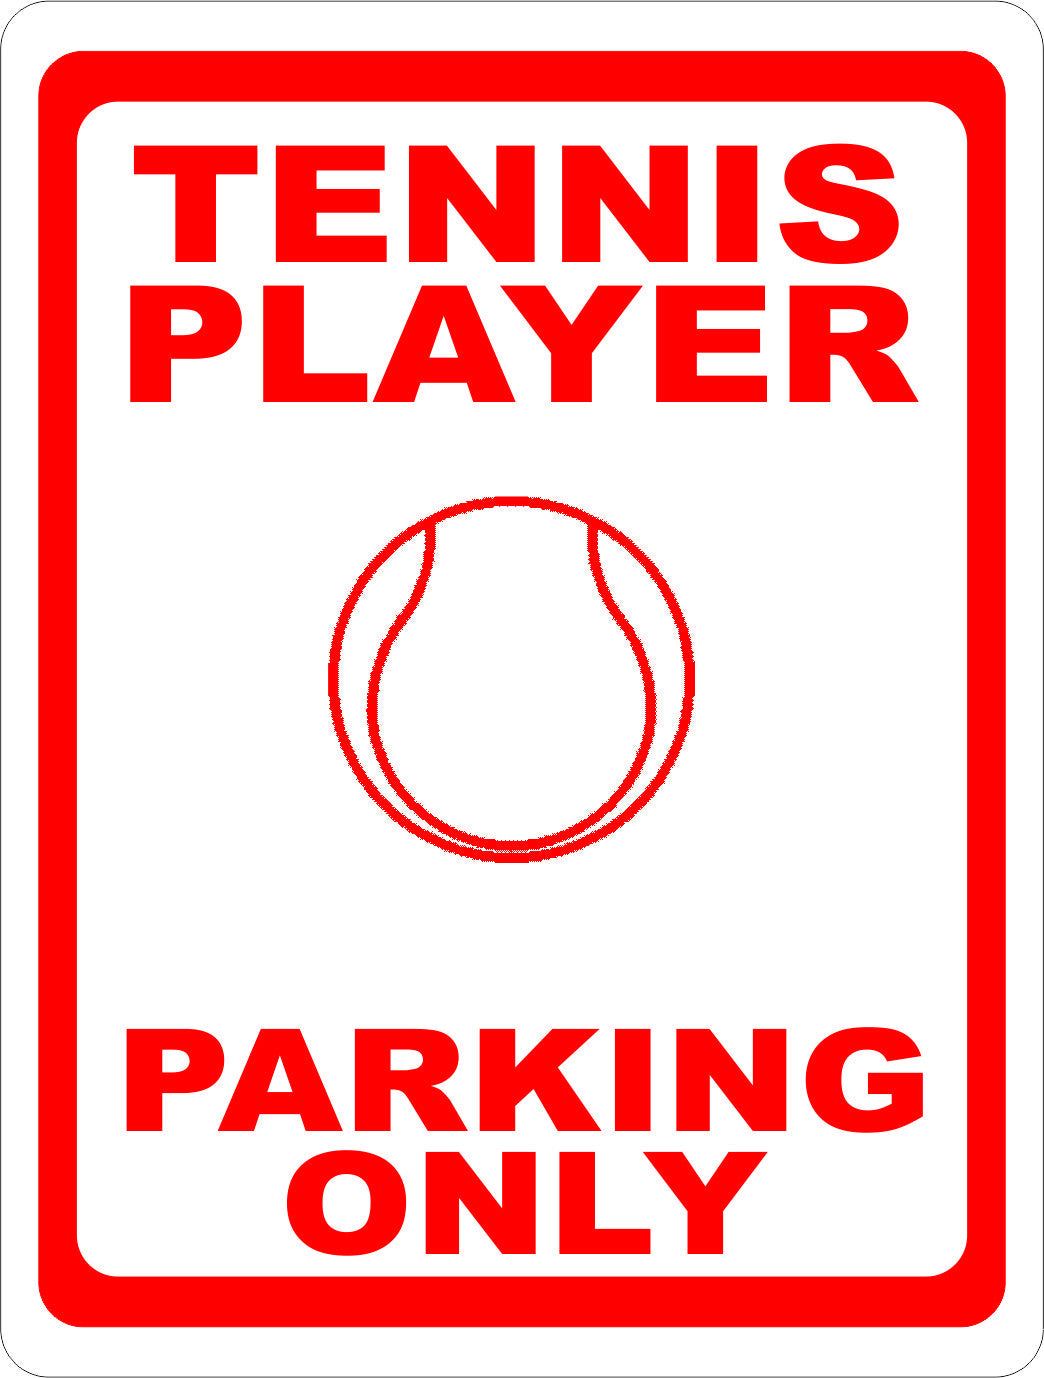 Tennis Player Parking Only Sign - Signs & Decals by SalaGraphics